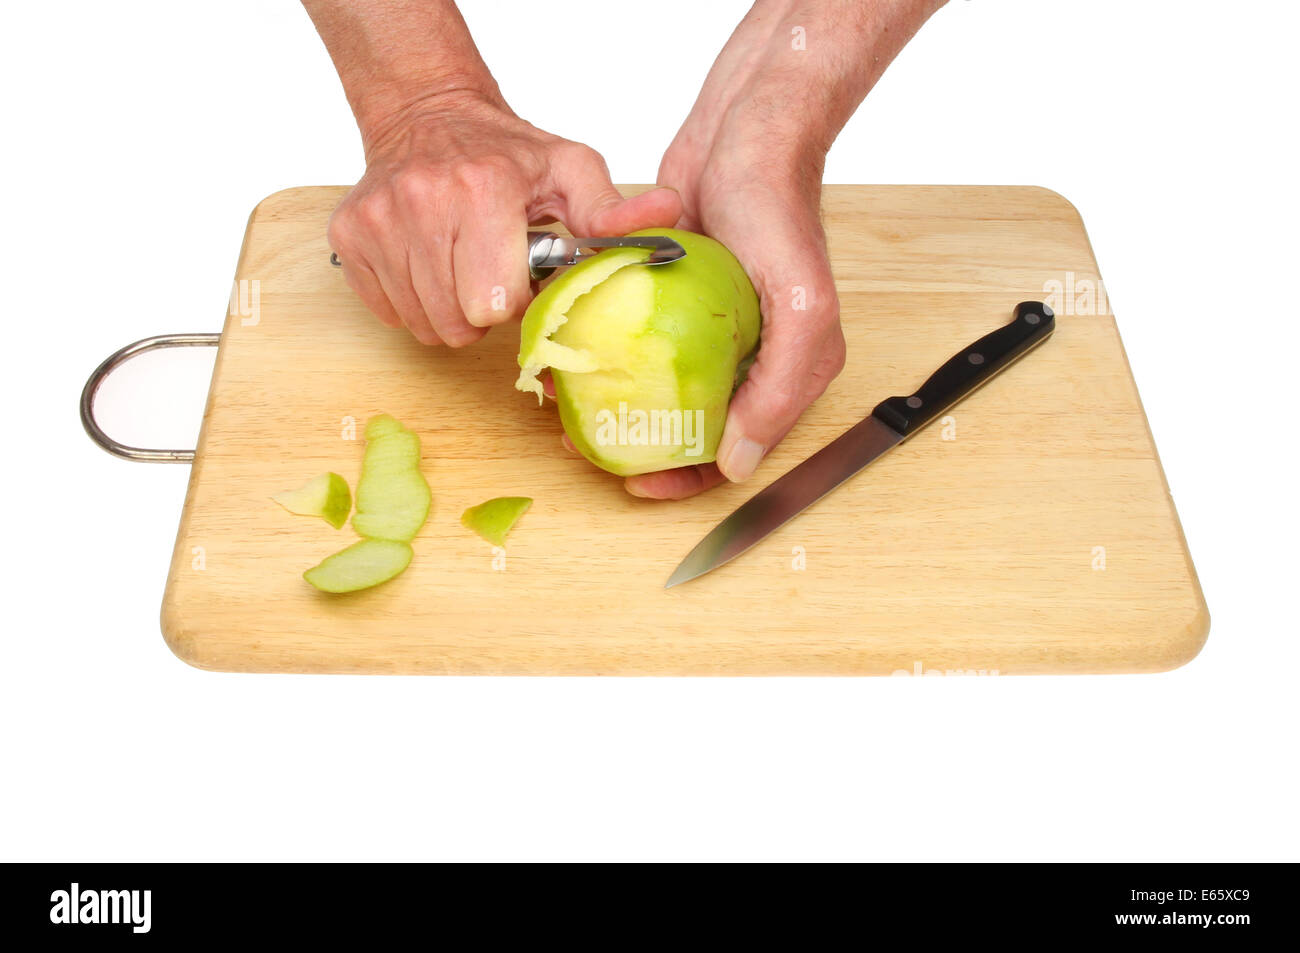 Hands peeling a cooking apple on a wooden board against a white background Stock Photo